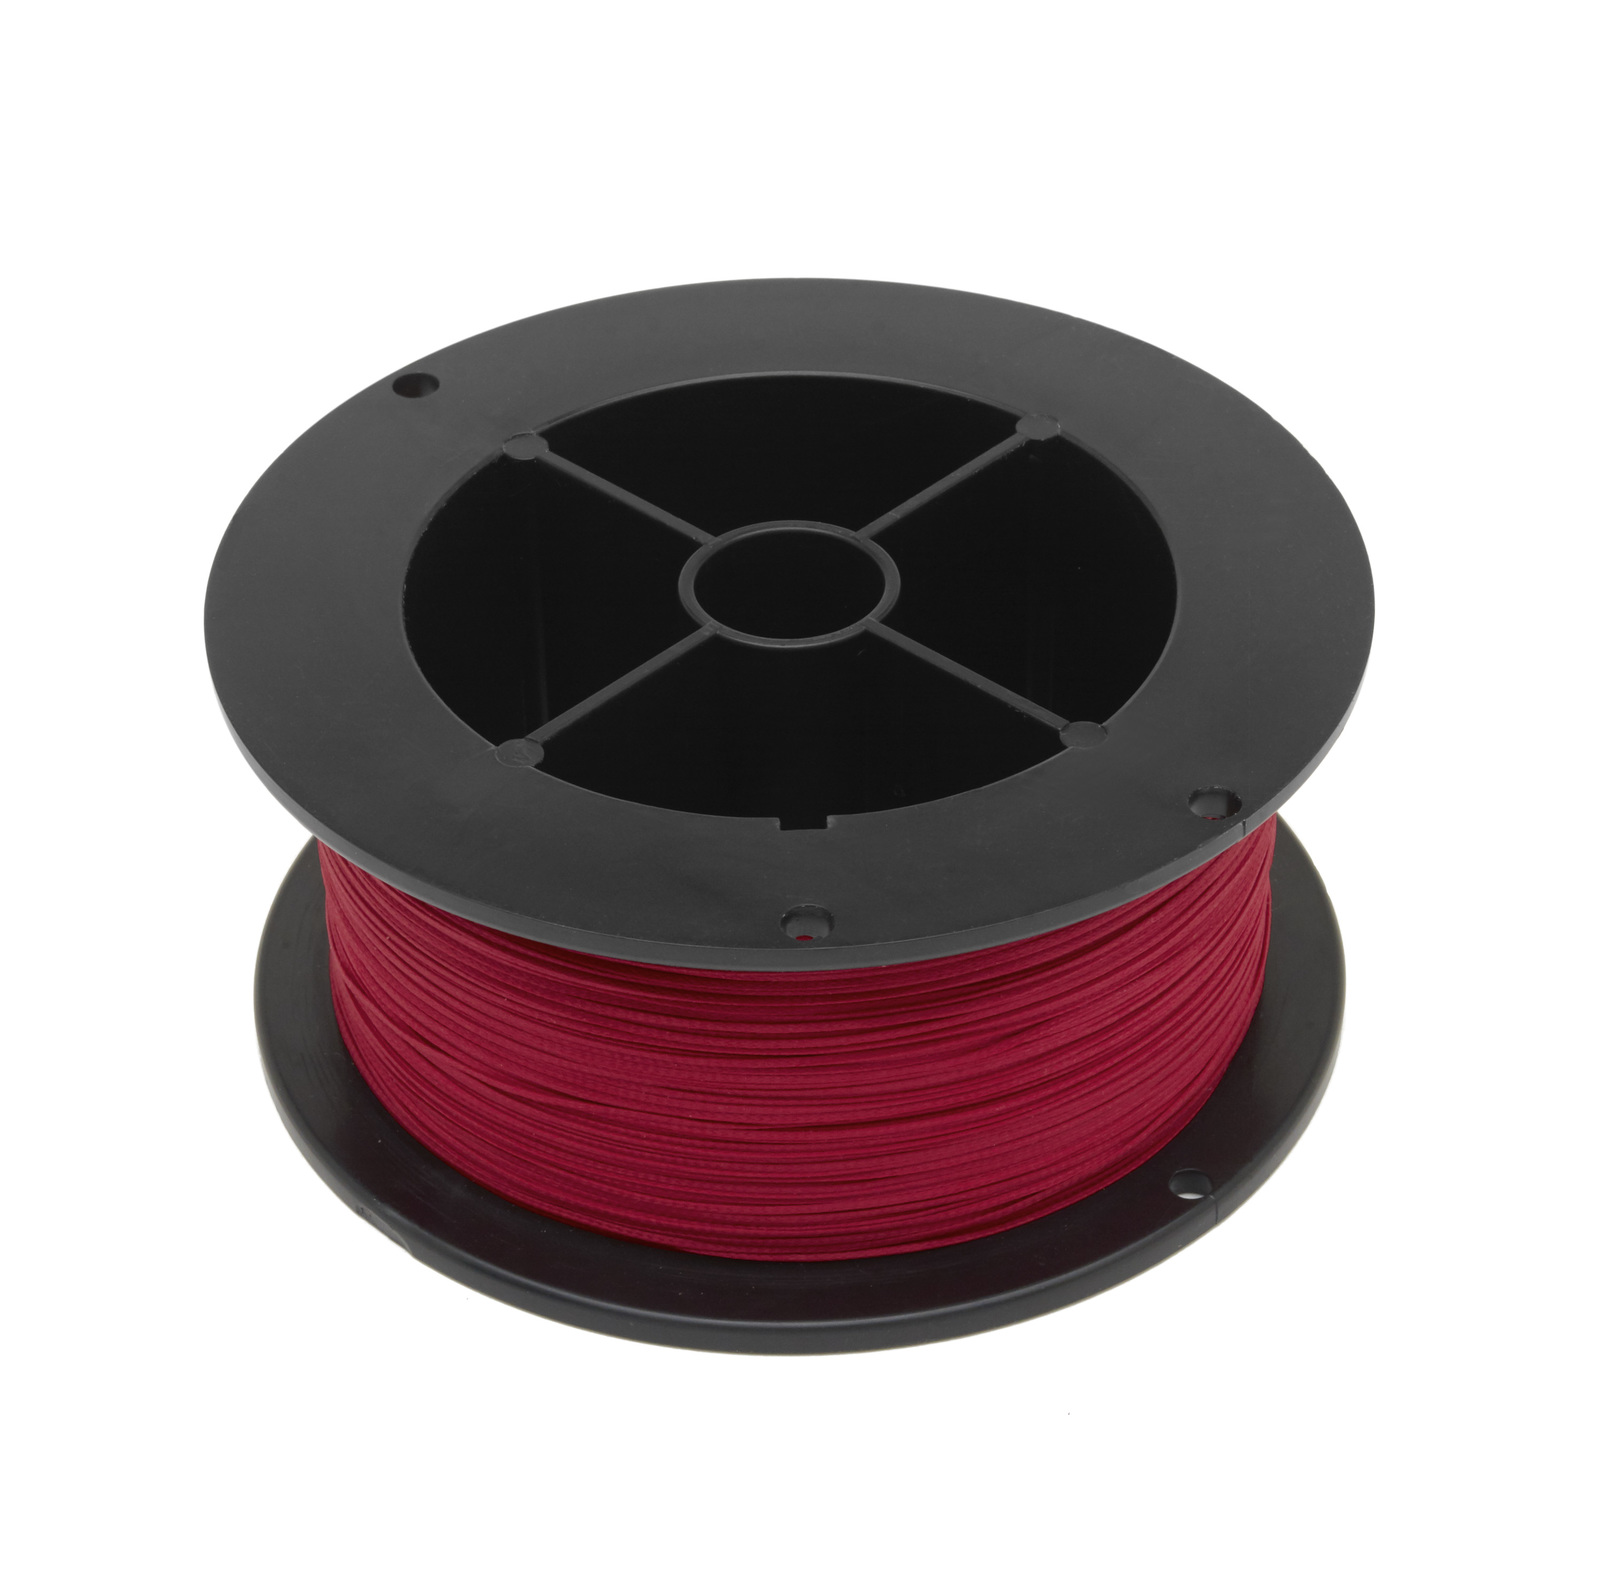 RIO Fly Line Backing - Bulk Spools · 30 lbs · 5000 yds. · Red